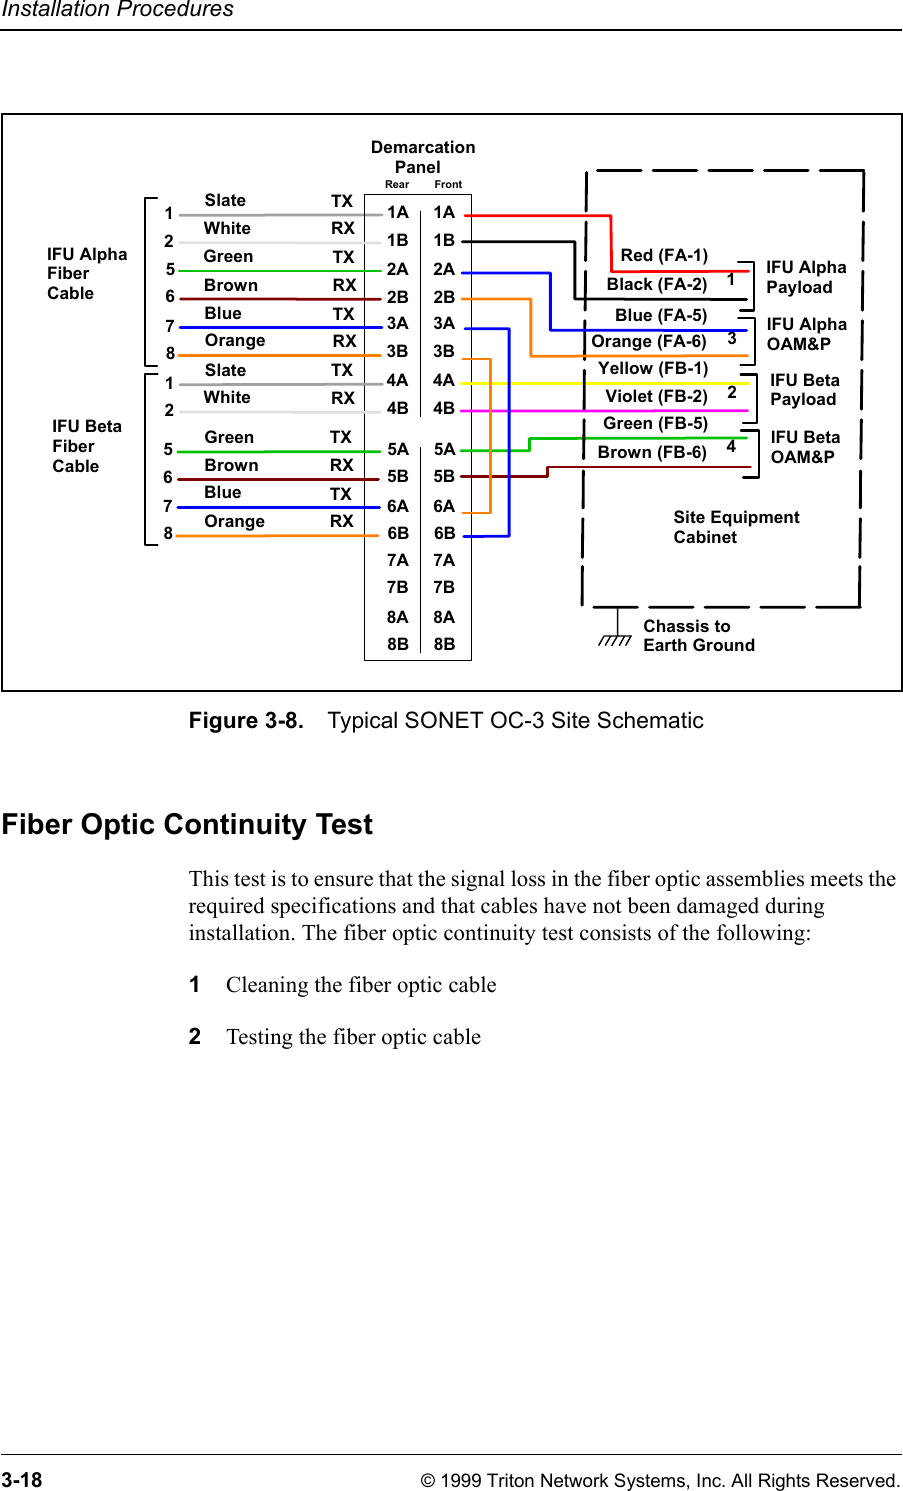 Installation Procedures3-18 © 1999 Triton Network Systems, Inc. All Rights Reserved.Figure 3-8. Typical SONET OC-3 Site SchematicFiber Optic Continuity TestThis test is to ensure that the signal loss in the fiber optic assemblies meets the required specifications and that cables have not been damaged during installation. The fiber optic continuity test consists of the following:1Cleaning the fiber optic cable2Testing the fiber optic cableIFU AlphaFiberCableSlateDemarcation     Panel12BlueWhite56781A1B2A2B3A3B4A4BRear Front1A1B2A2B3A3B4A4BIFU BetaFiberCable1256785A5B6A6B7A7B8A8B5A5B6A6B7A7B8A8B1234IFU AlphaPayloadIFU AlphaOAM&amp;PIFU BetaPayloadIFU BetaOAM&amp;PSite EquipmentCabinetTXRXTXRXTXRXTXRXTXRXTXRXChassis toEarth GroundBrownGreenOrangeBlue (FA-5)Orange (FA-6)Yellow (FB-1)Violet (FB-2)Brown (FB-6)Green (FB-5)Red (FA-1)Black (FA-2)SlateBlueWhiteBrownGreenOrange